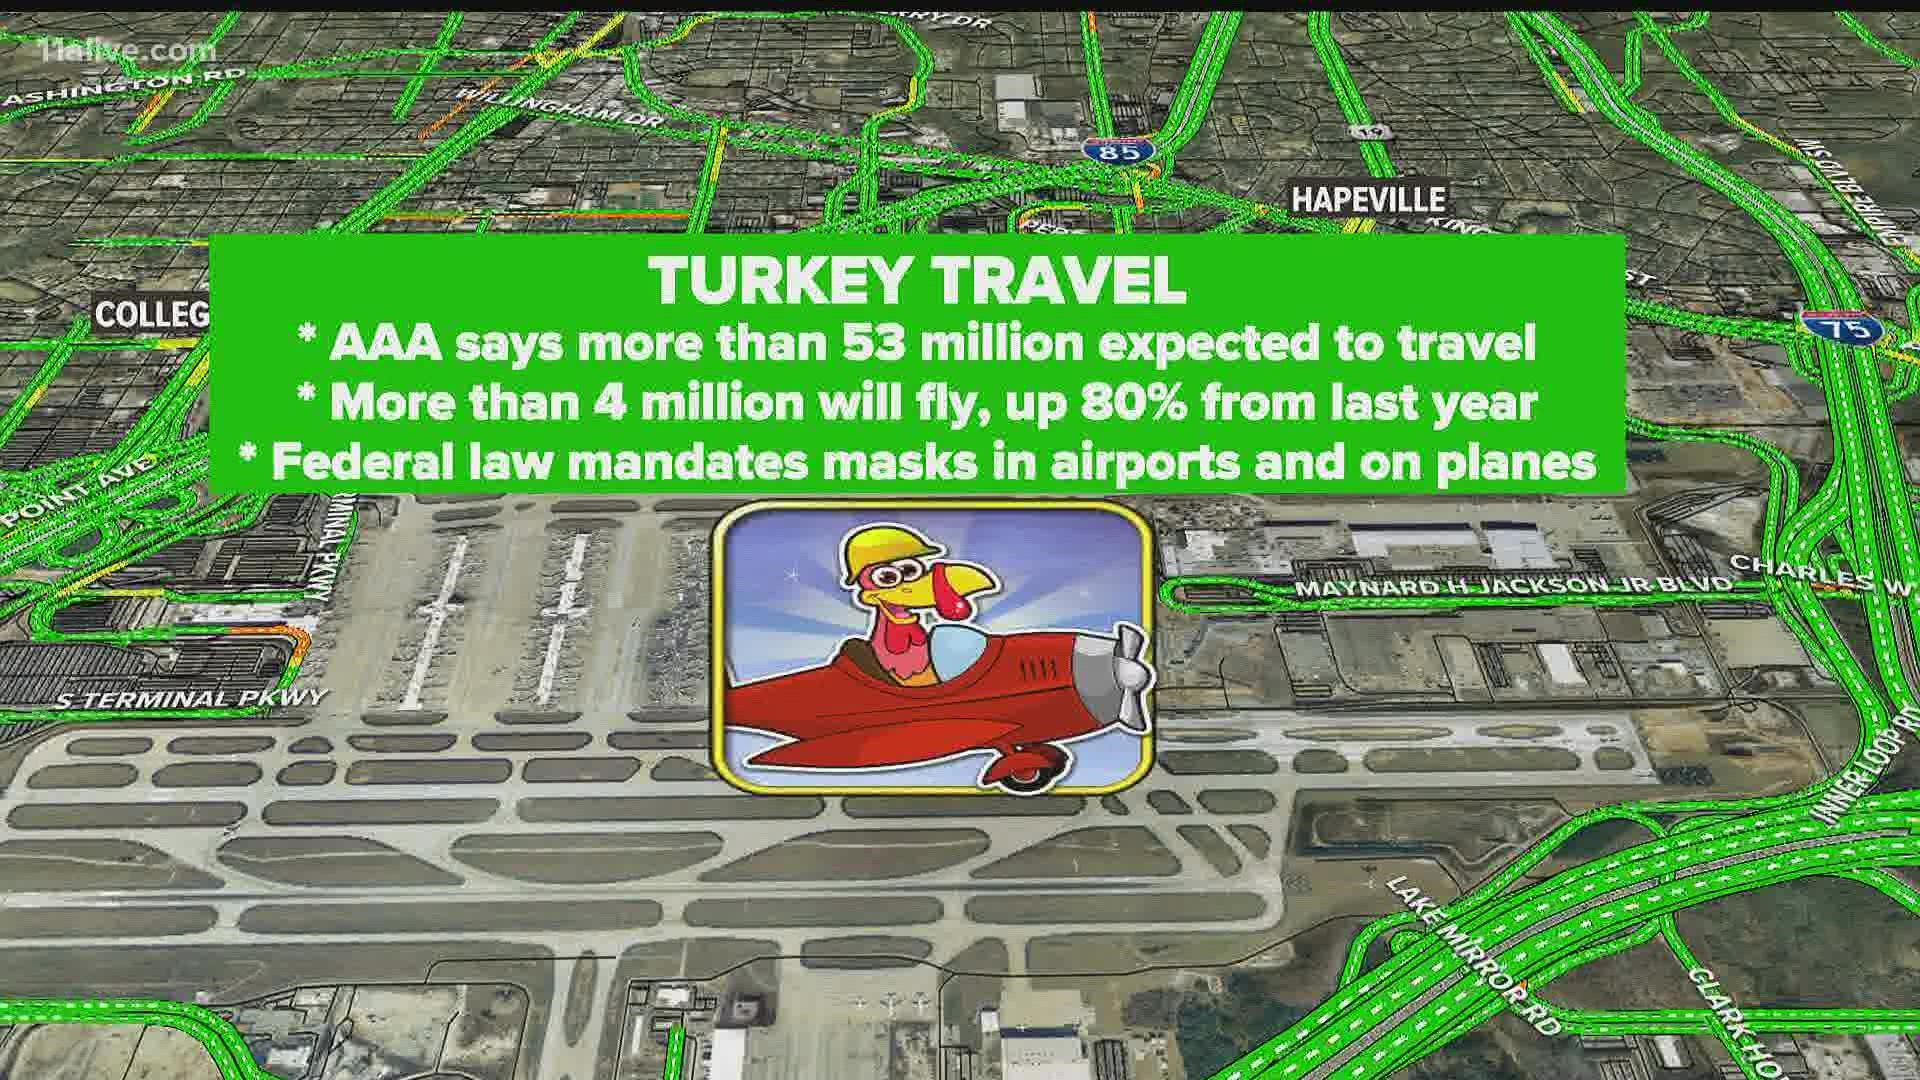 Georgia's Department of Transportation says to expect heavy congestion on the roads ahead of the typical Thanksgiving travel days.